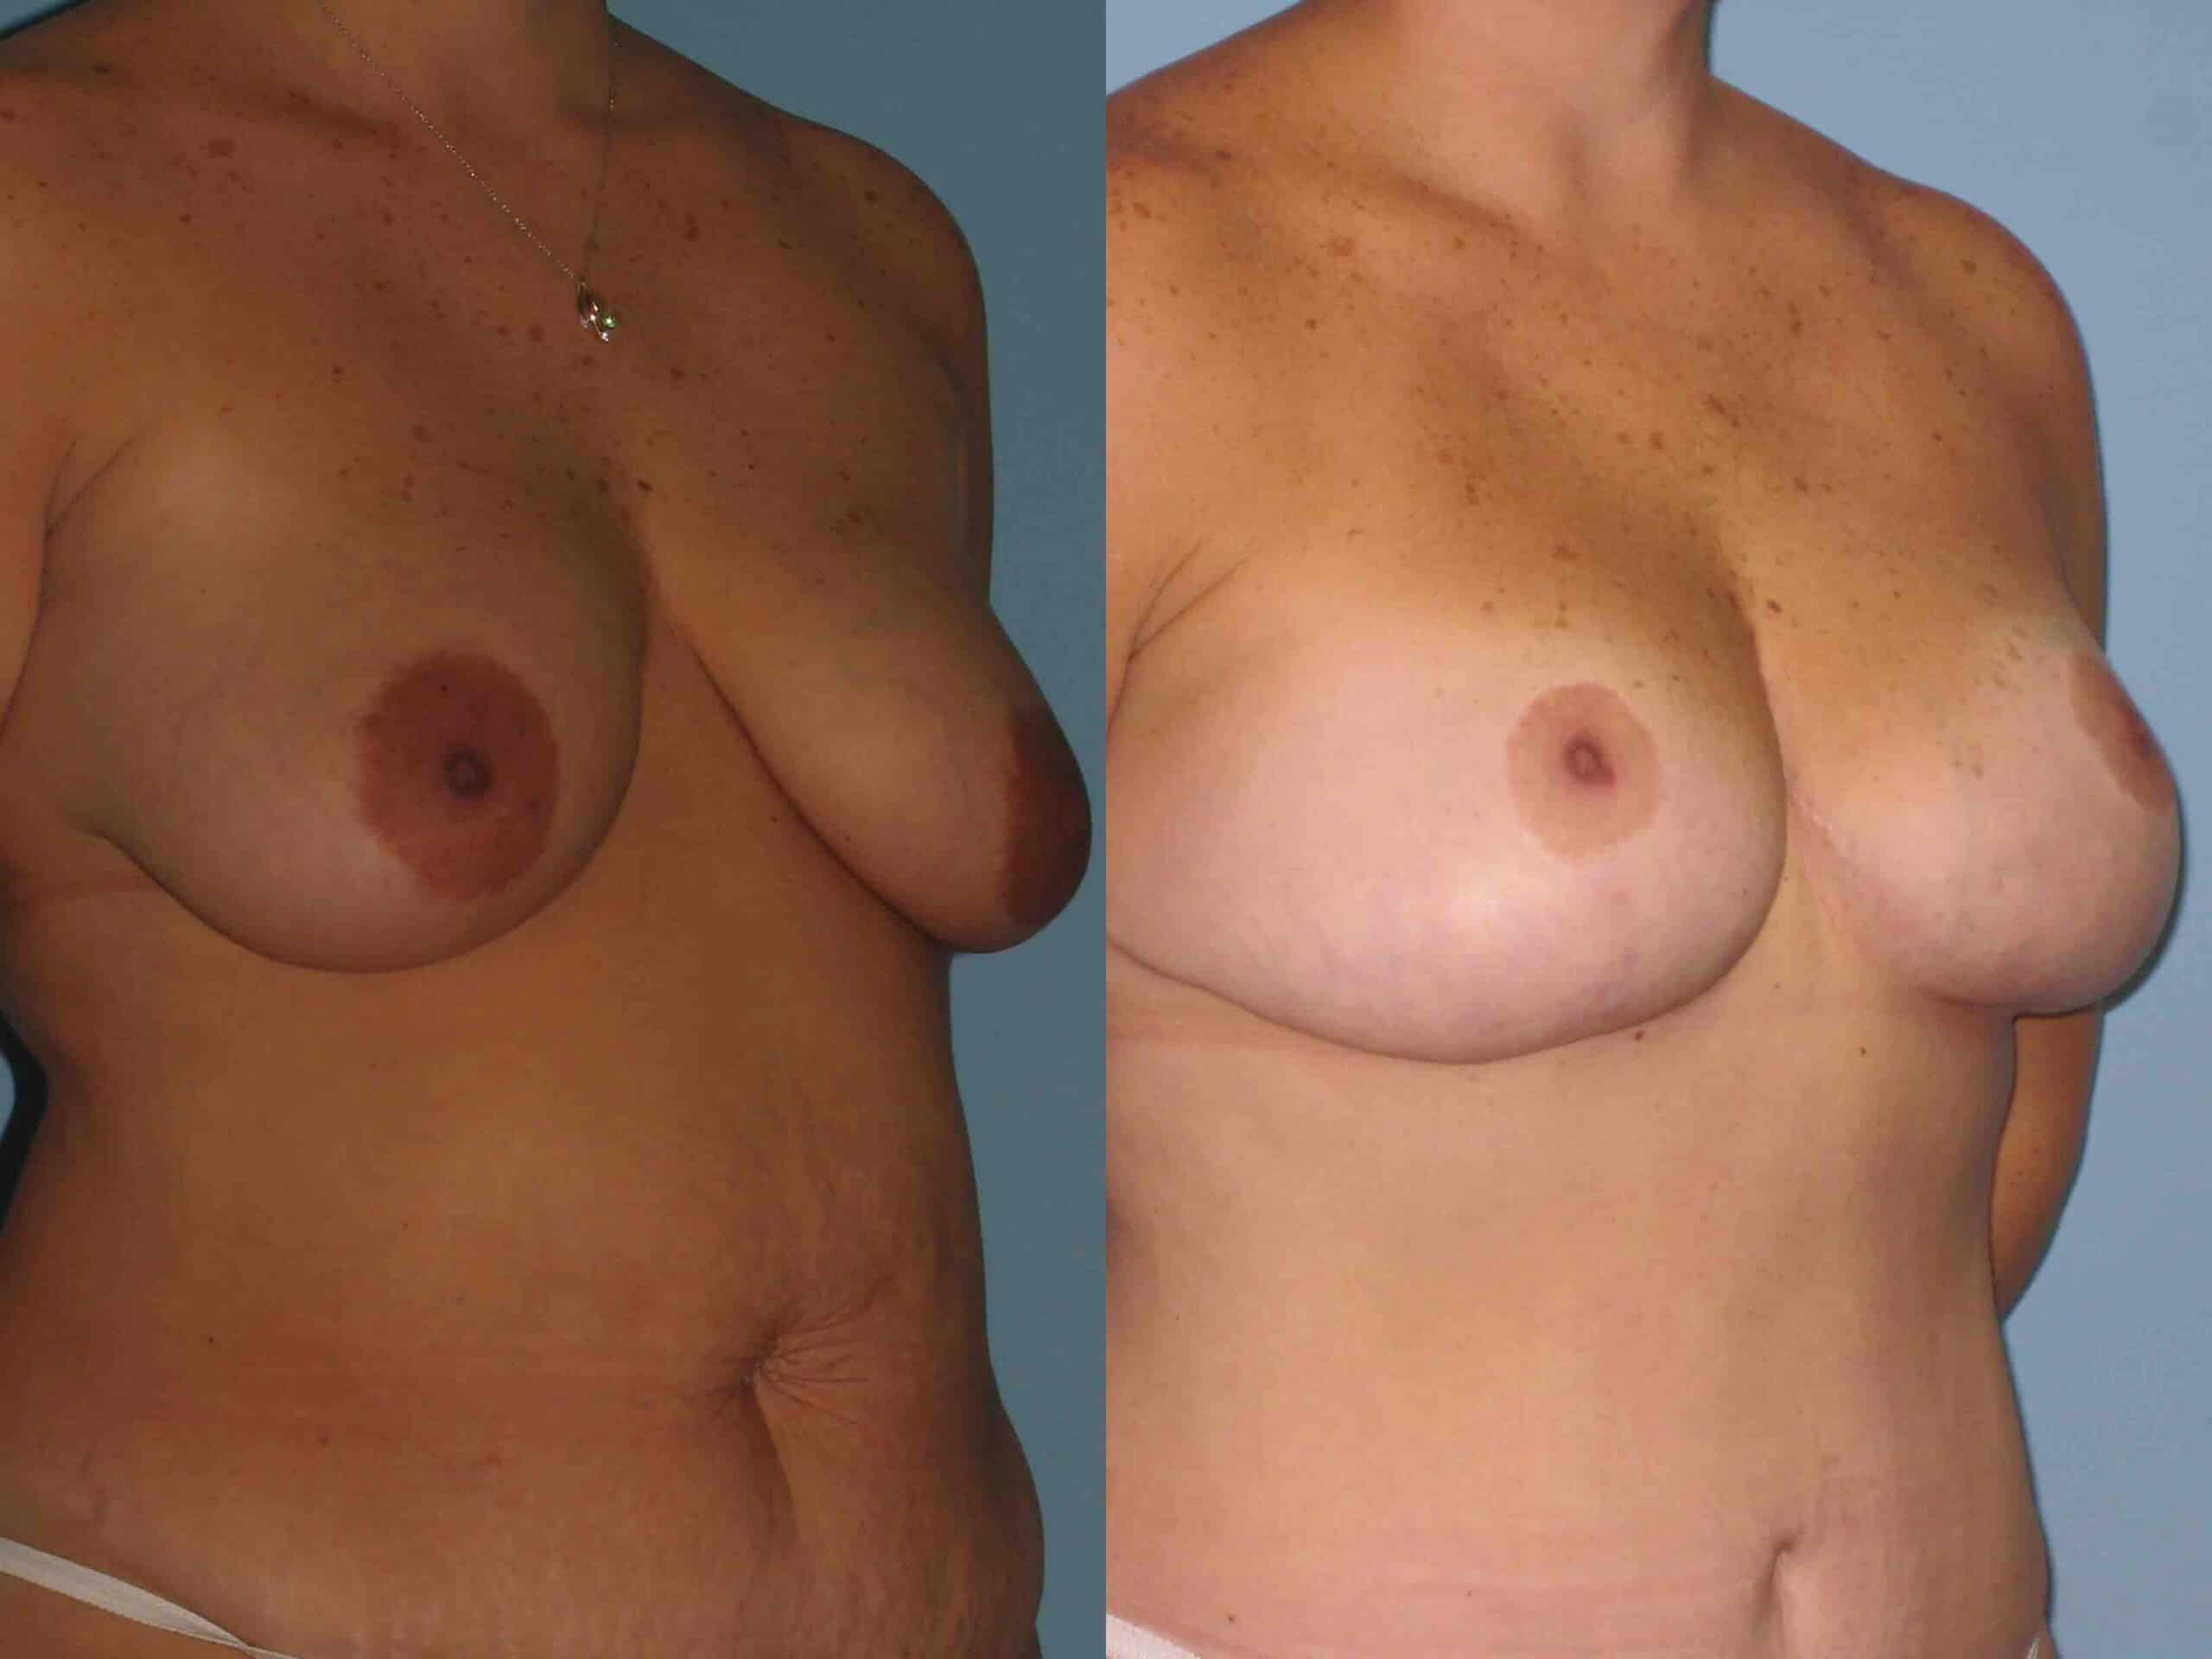 Before and after, patient 2 yr 7 mo post op from VASER Flanks Axilla Back, Breast Lift/Mastopexy, Tummy Tuck procedures performed by Dr. Paul Vanek